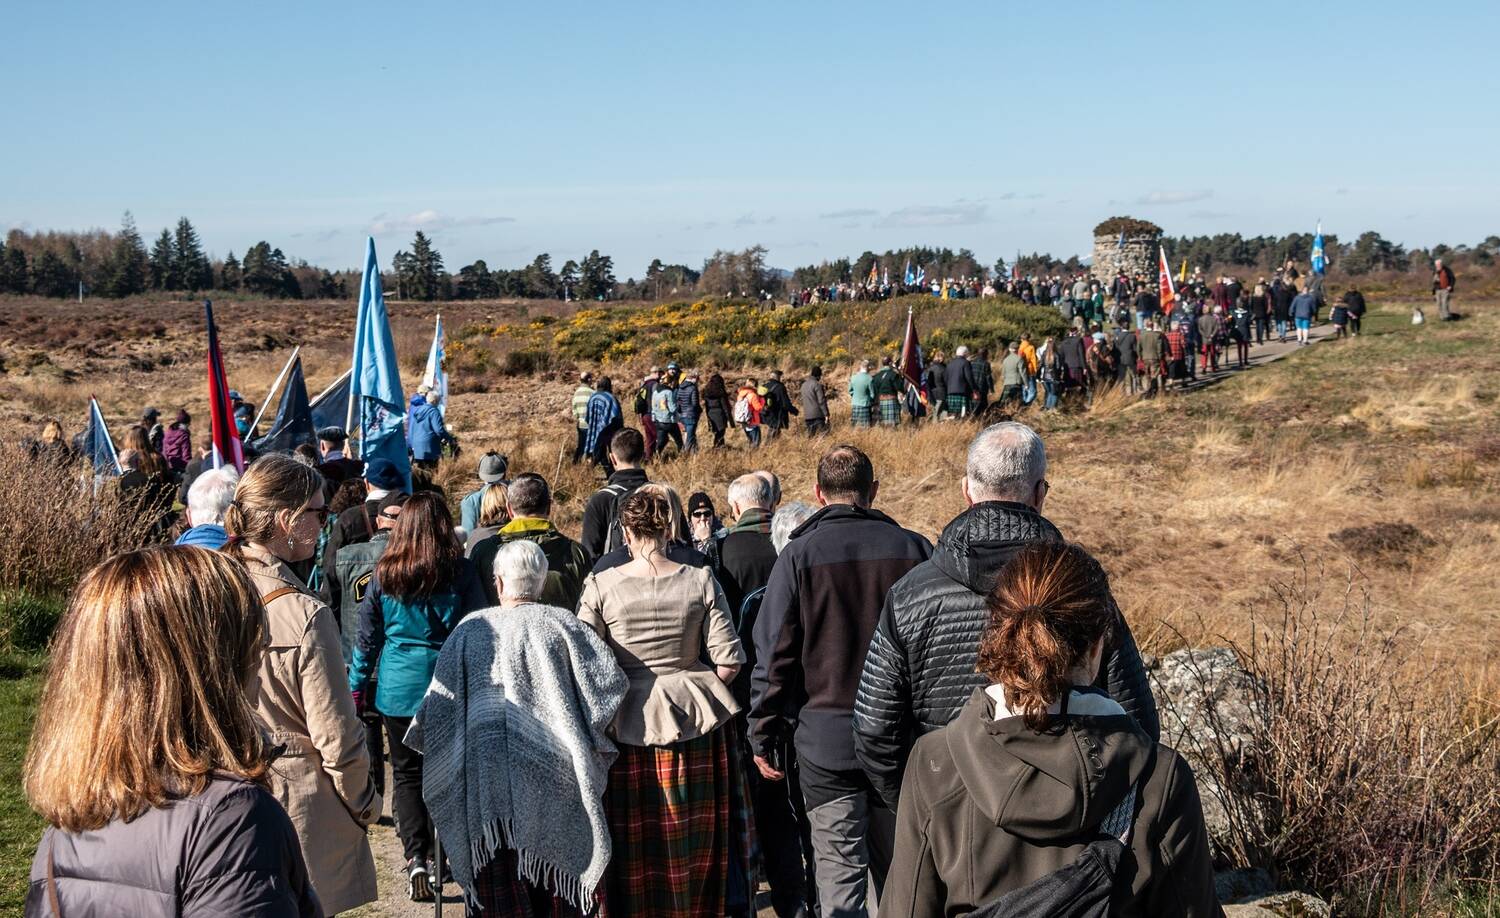 A long line of people snake along a footpath across Culloden Moor towards a large stone cairn in the distance. Many are carrying flags.